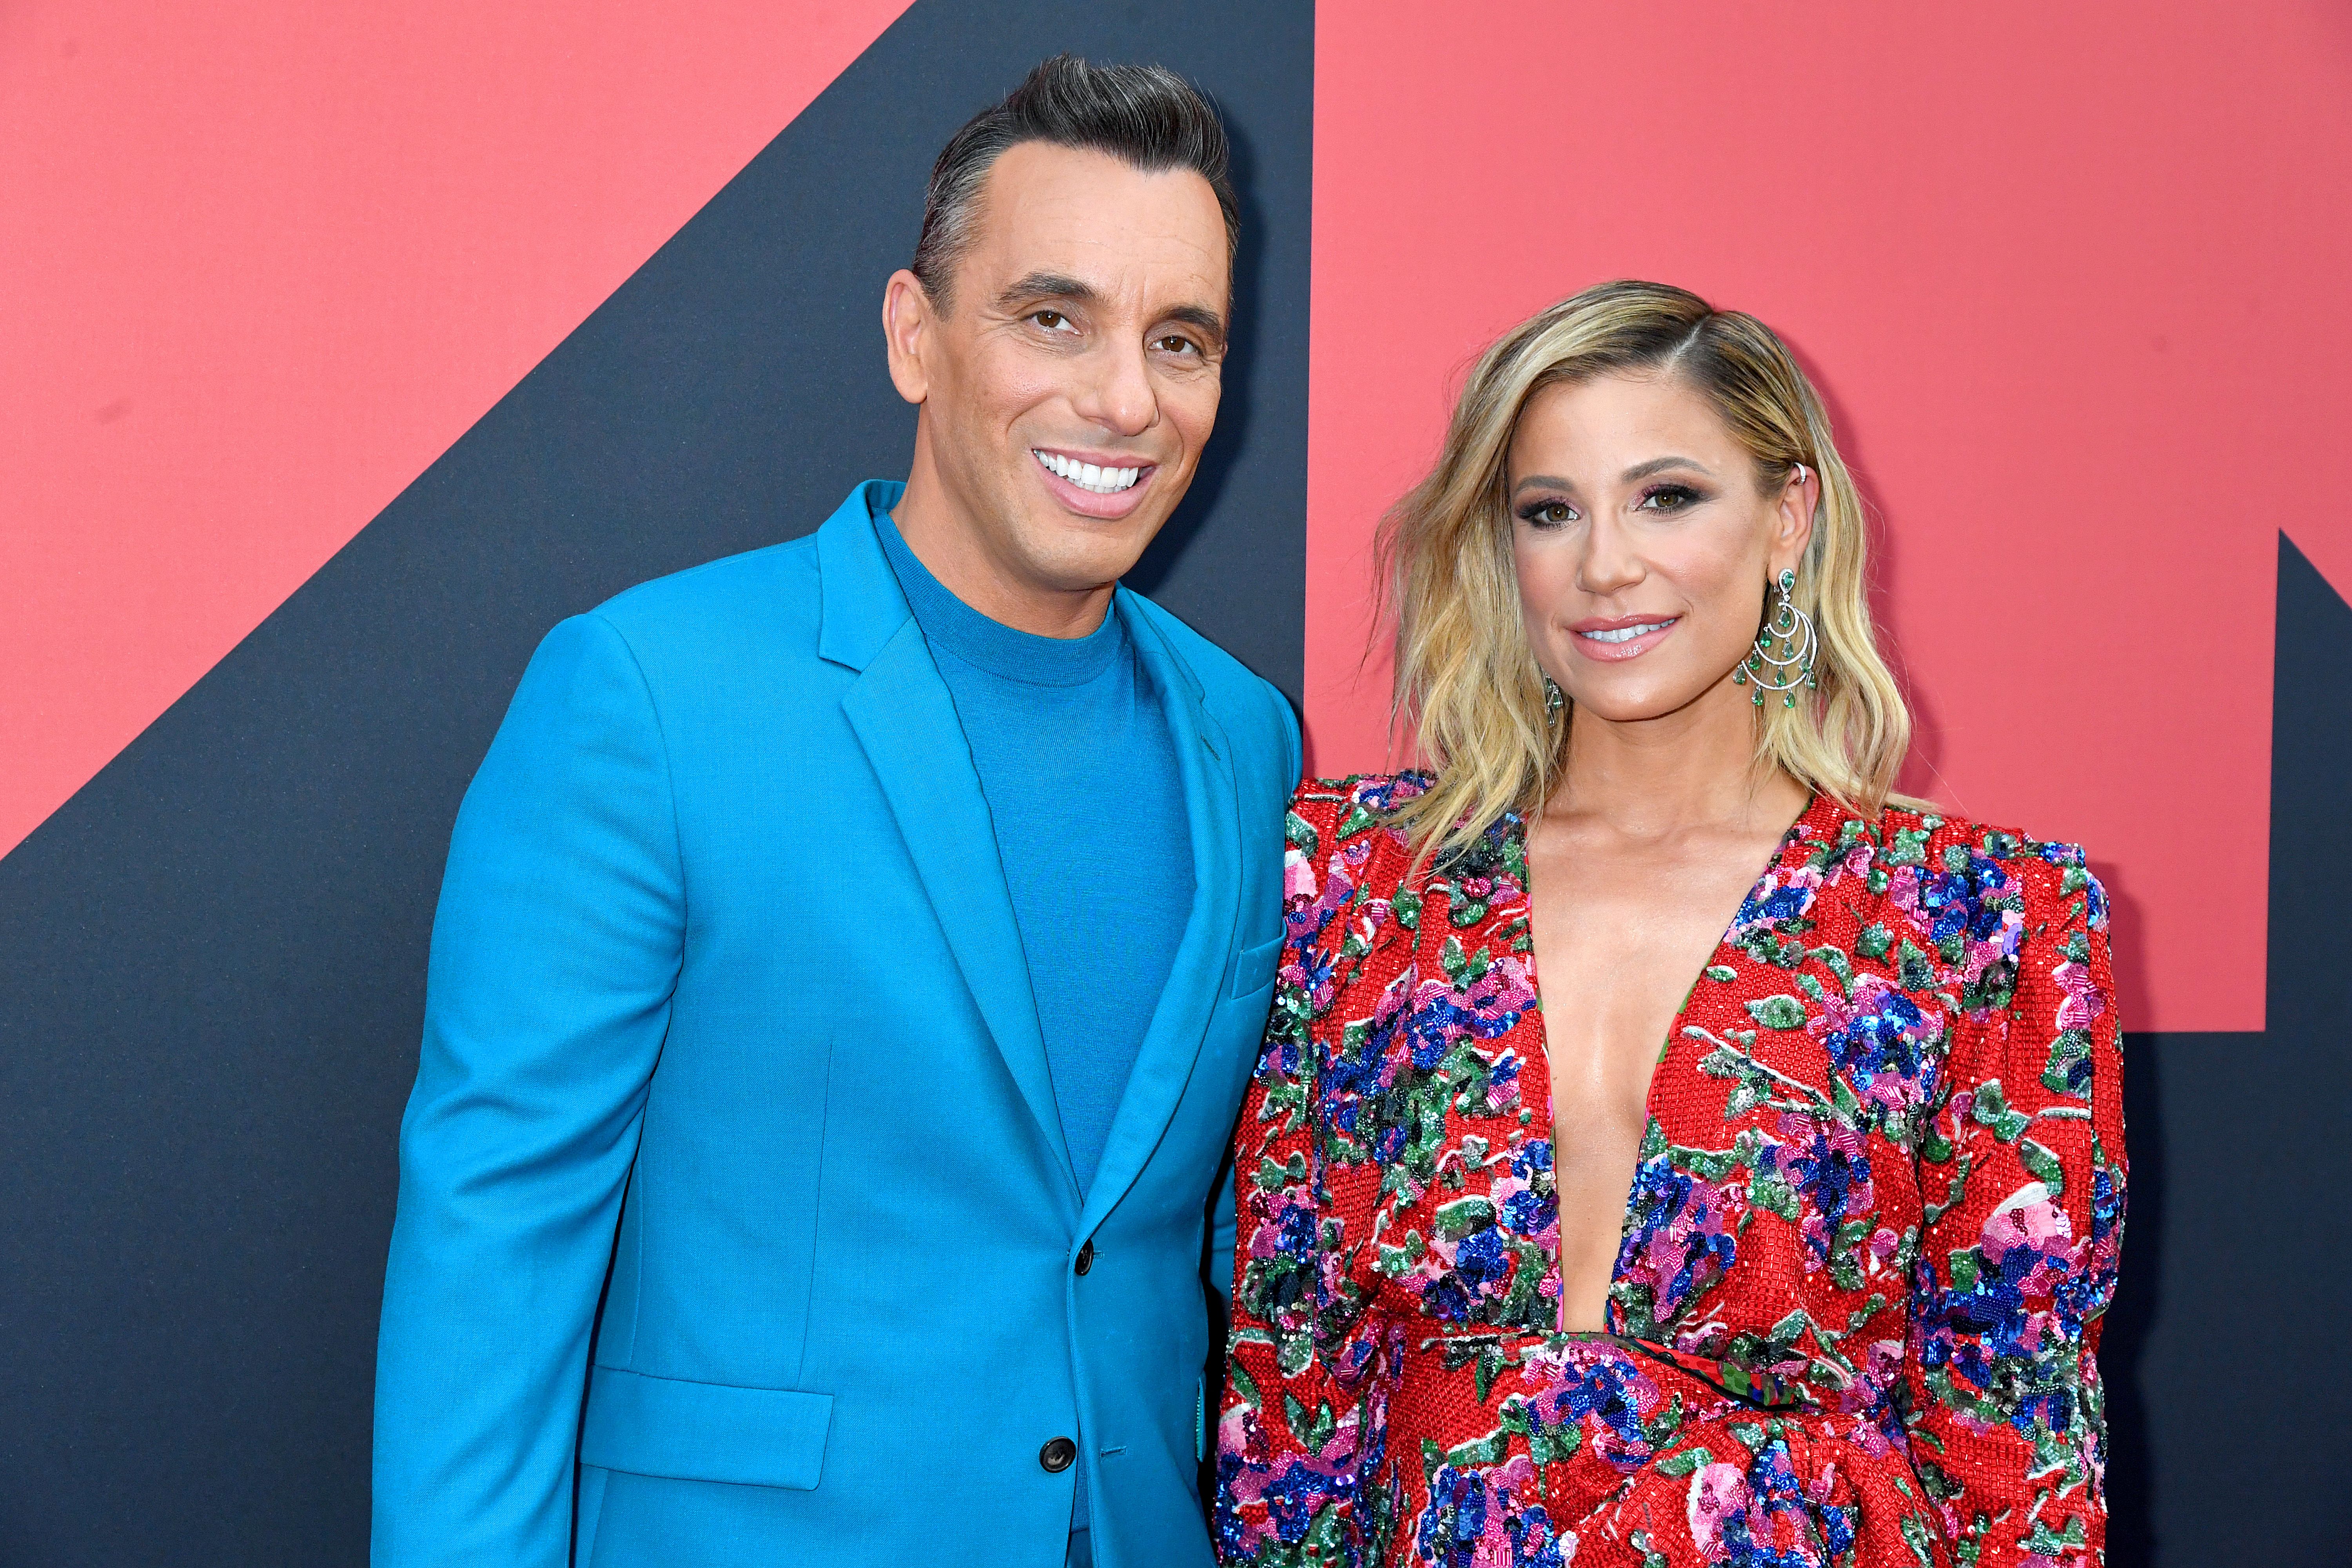 Sebastian Maniscalco and Lana Gomez at the 2019 MTV Video Music Awards in 2019 in Newark, New Jersey | Source: Getty Images